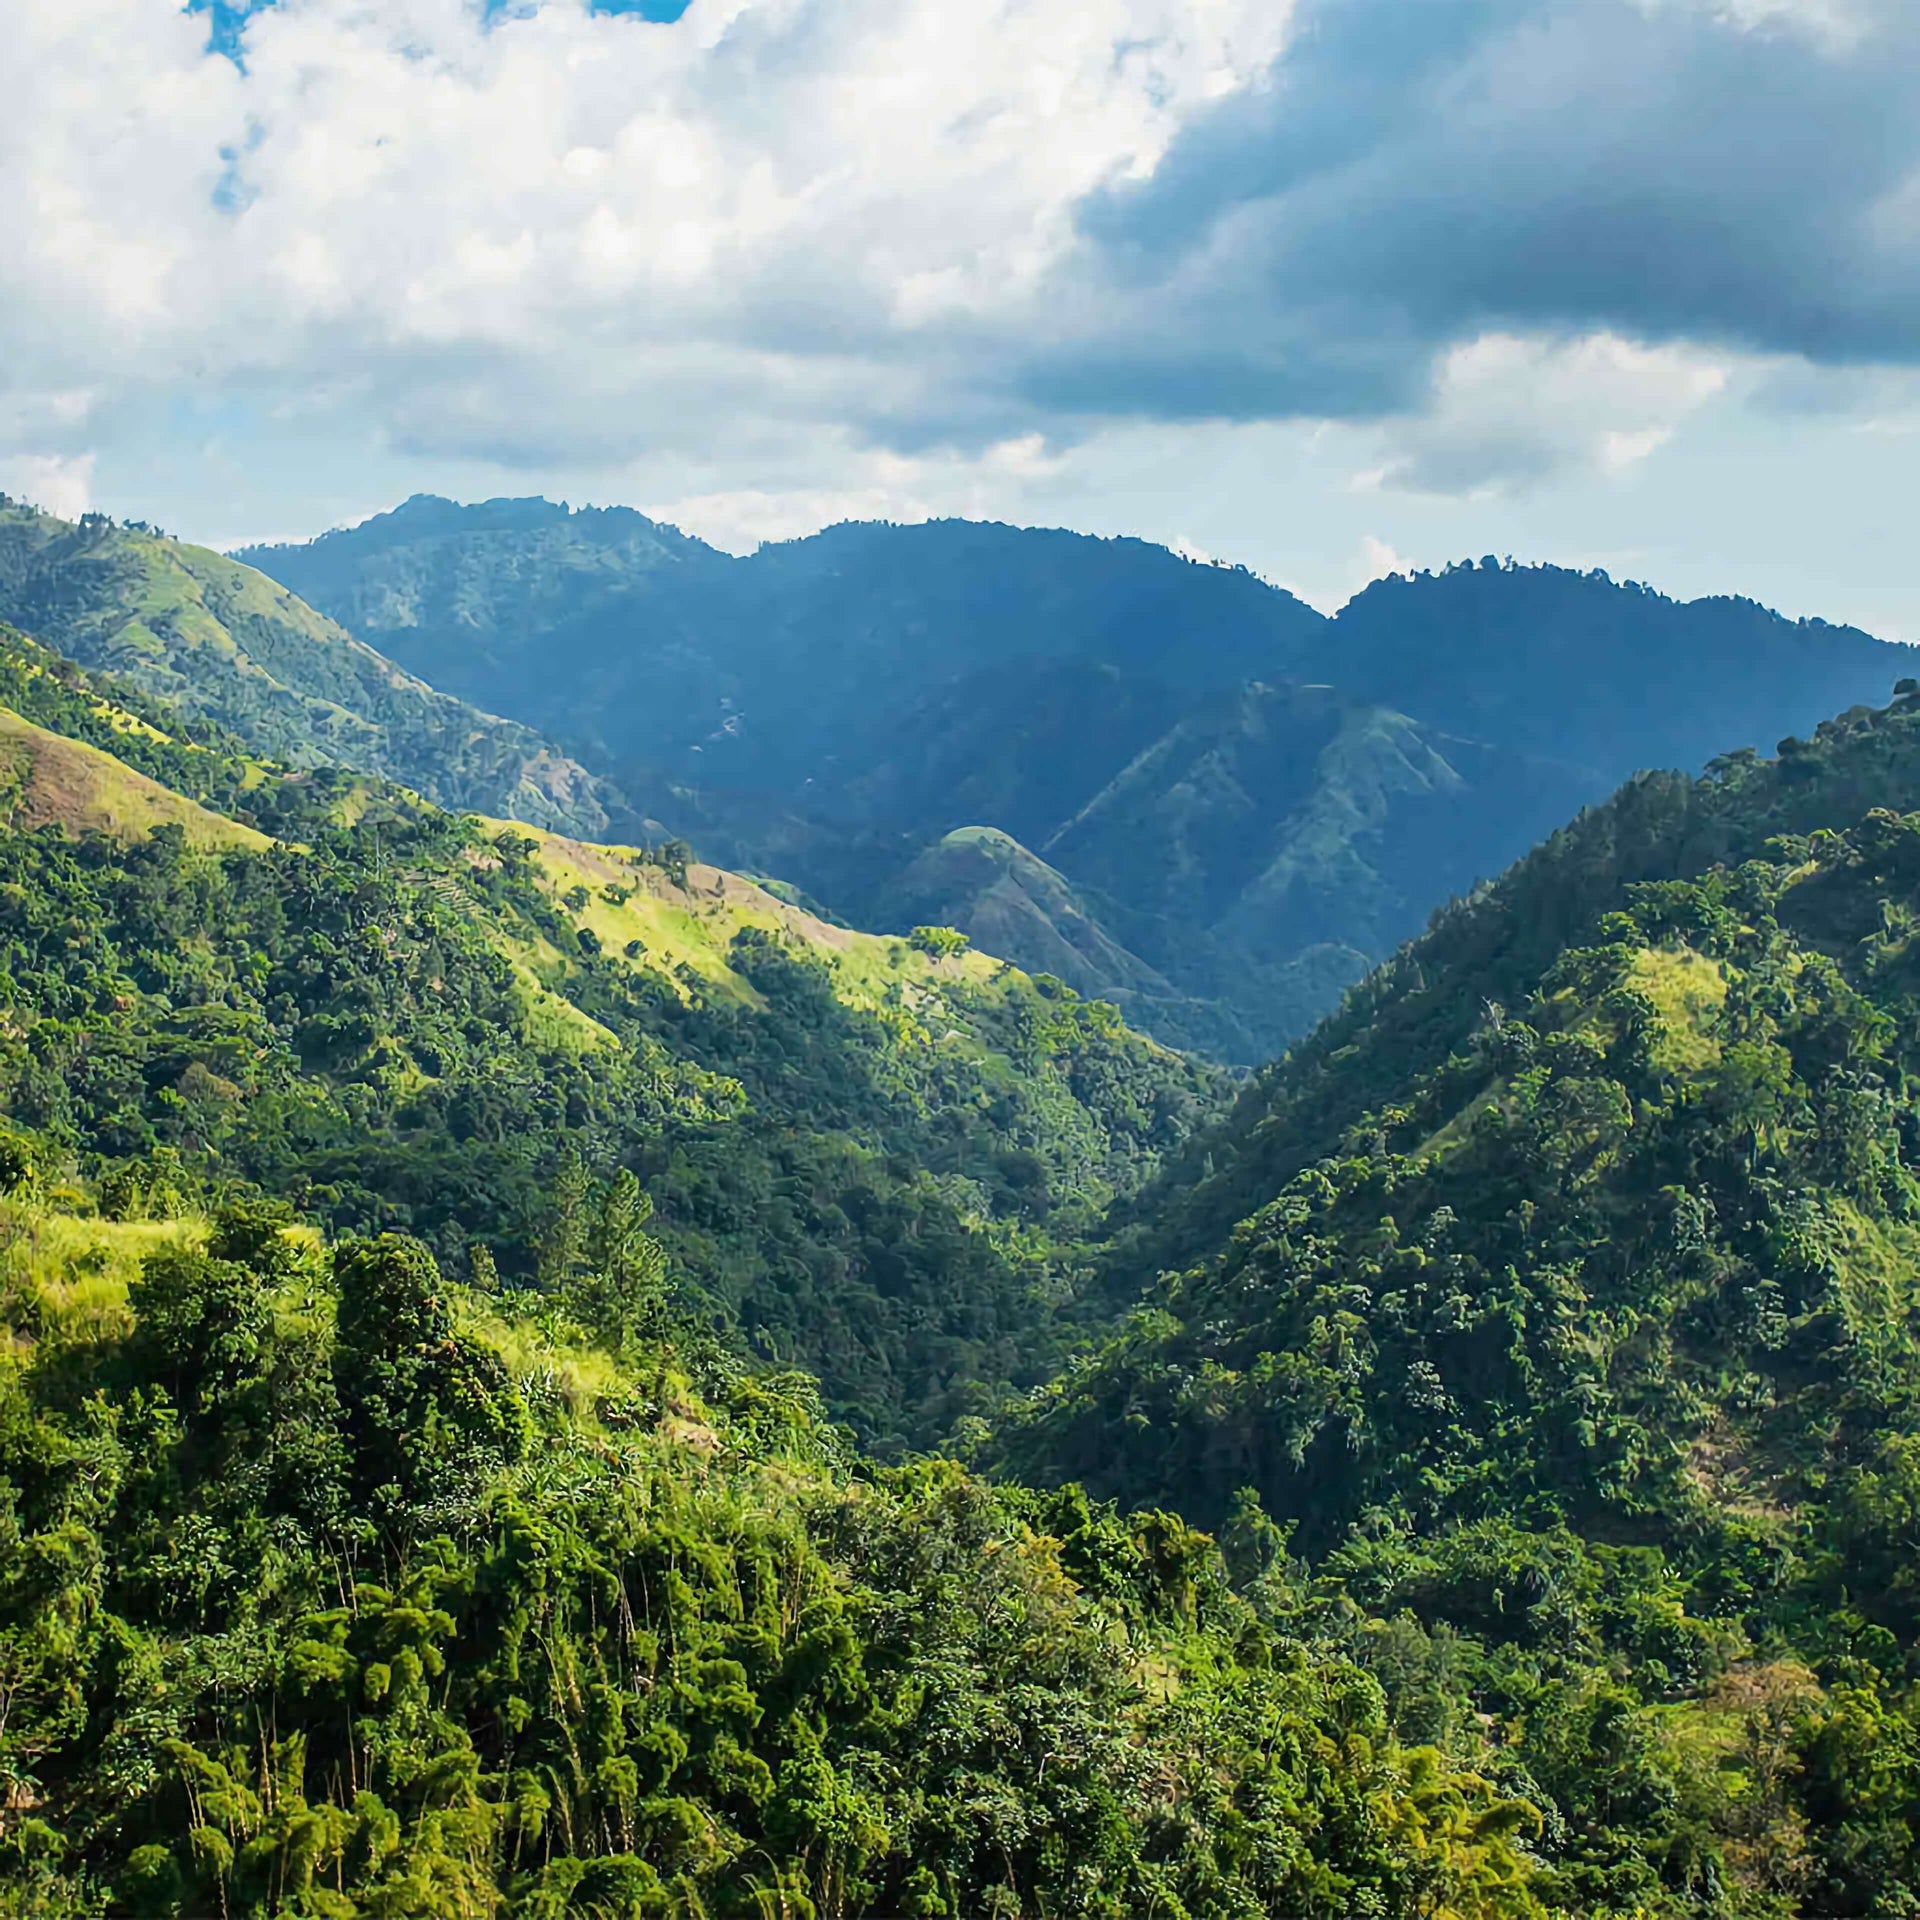 The Majestic Jamaican Blue Mountains, where the world-famous Jamaica Blue Mountain Coffee is produced